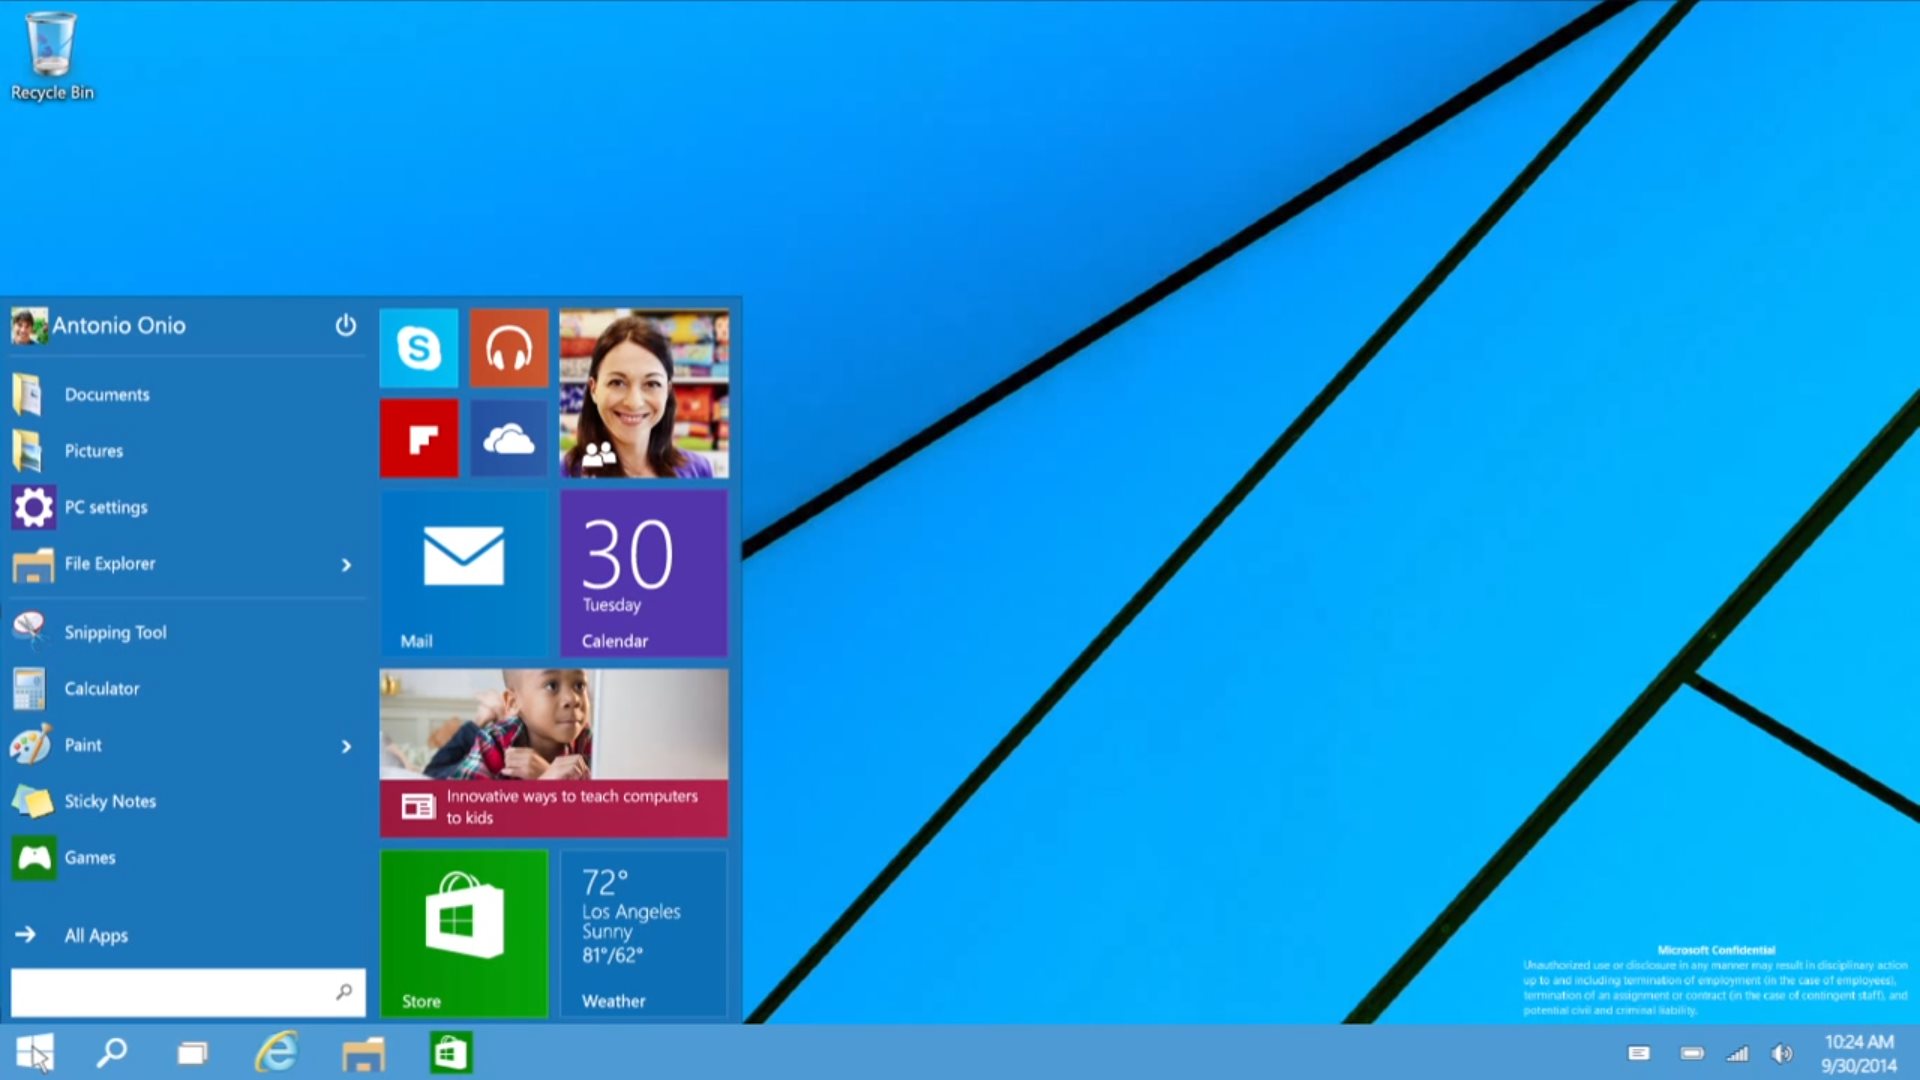 Windows 10 Continuum Revealed in Official Video   Softpedia